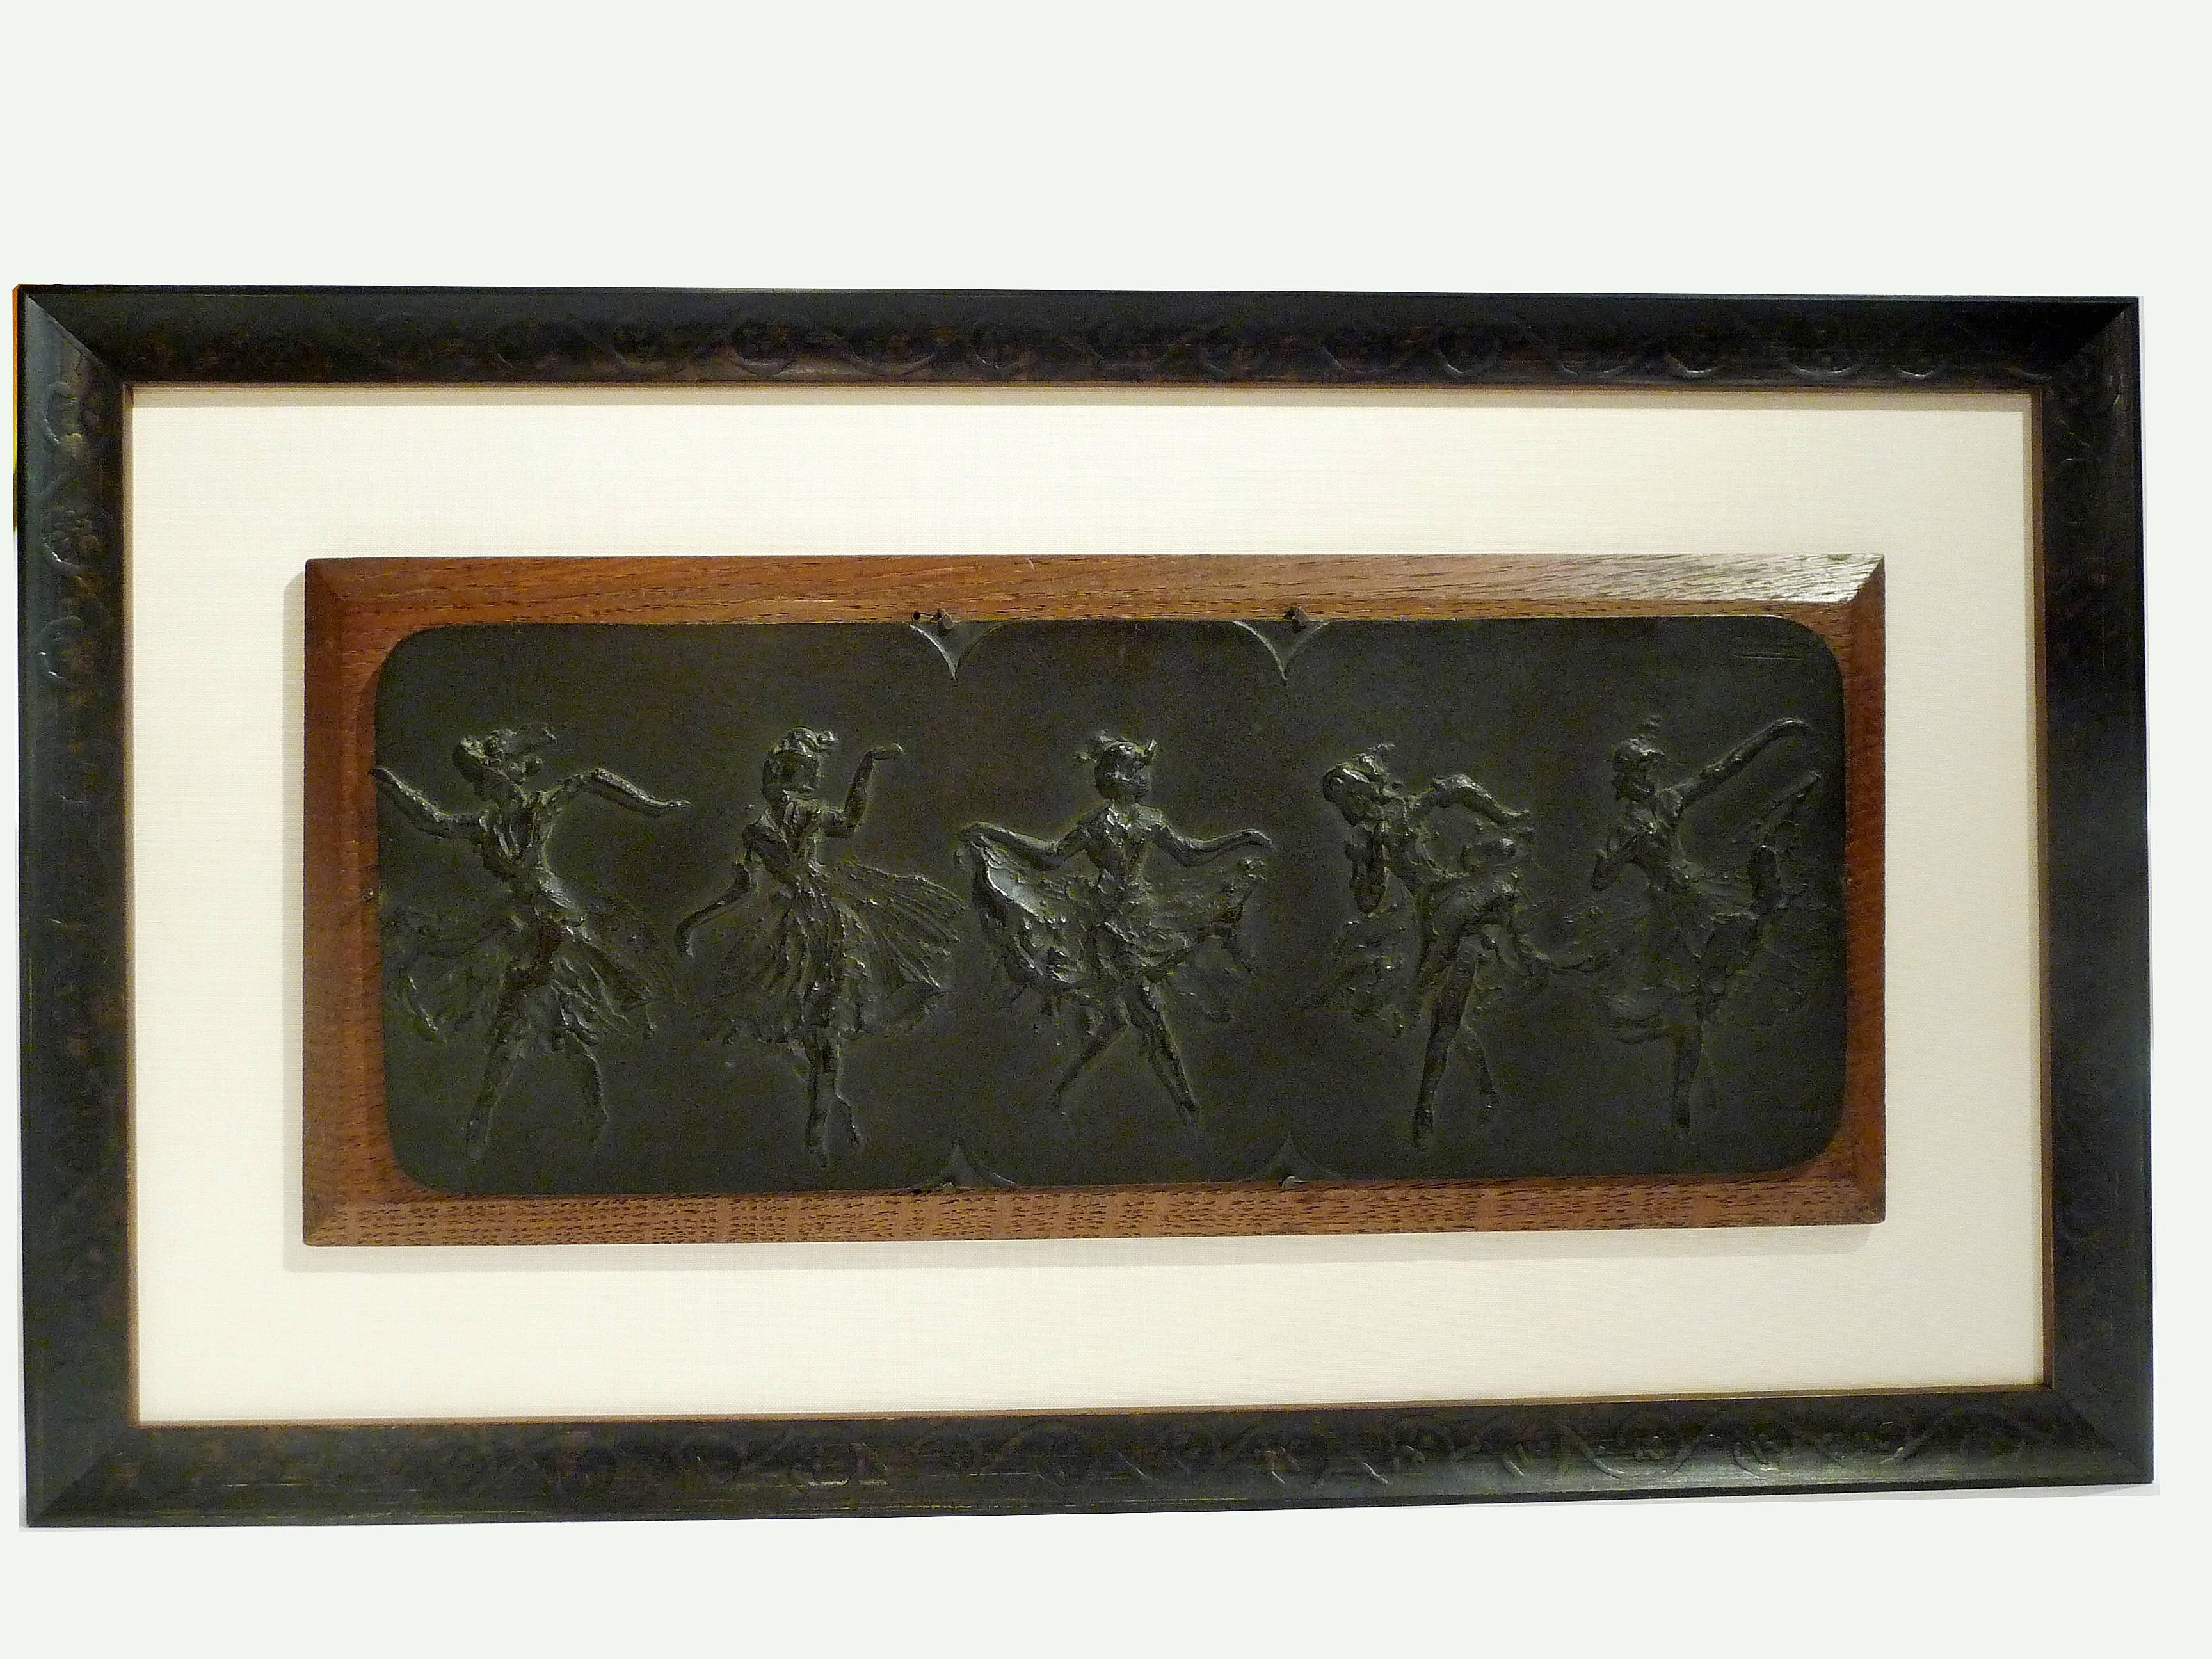 Maurice Charpentier-Mio.
A bronze bas-relief featuring five poses of the dancer Anna Pavlova in Rondino.
Bearing the monogram of the artist, dated 